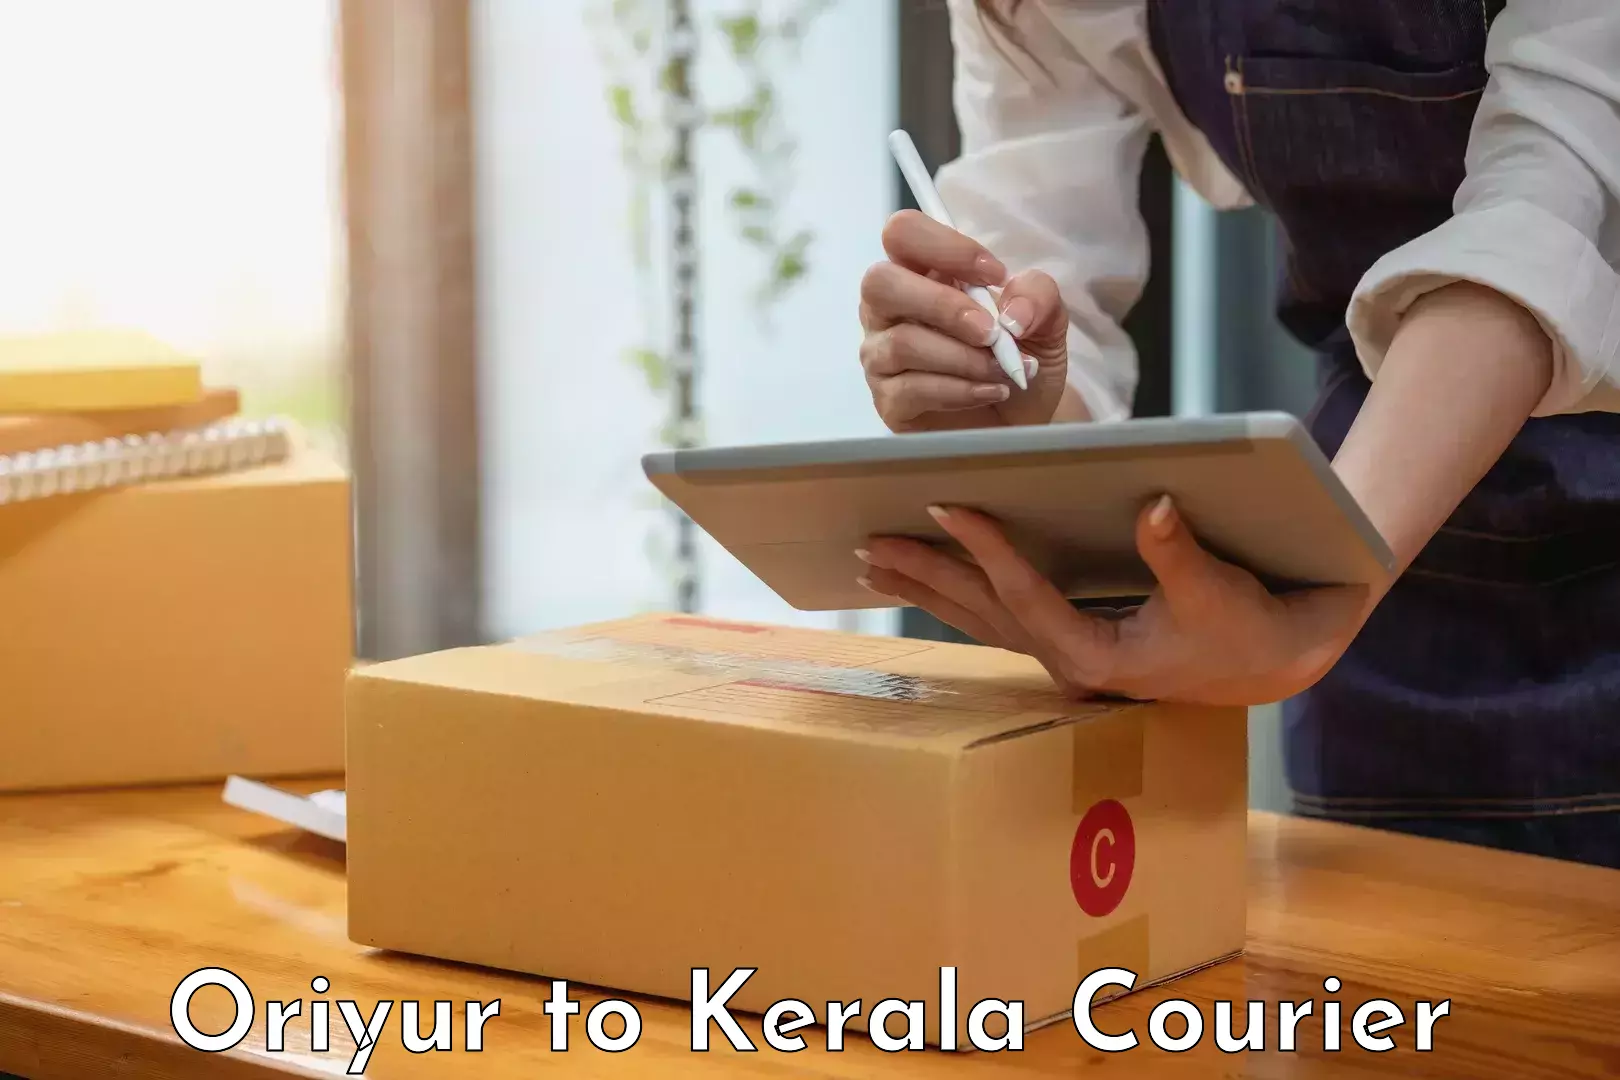 Round-the-clock parcel delivery Oriyur to Palai